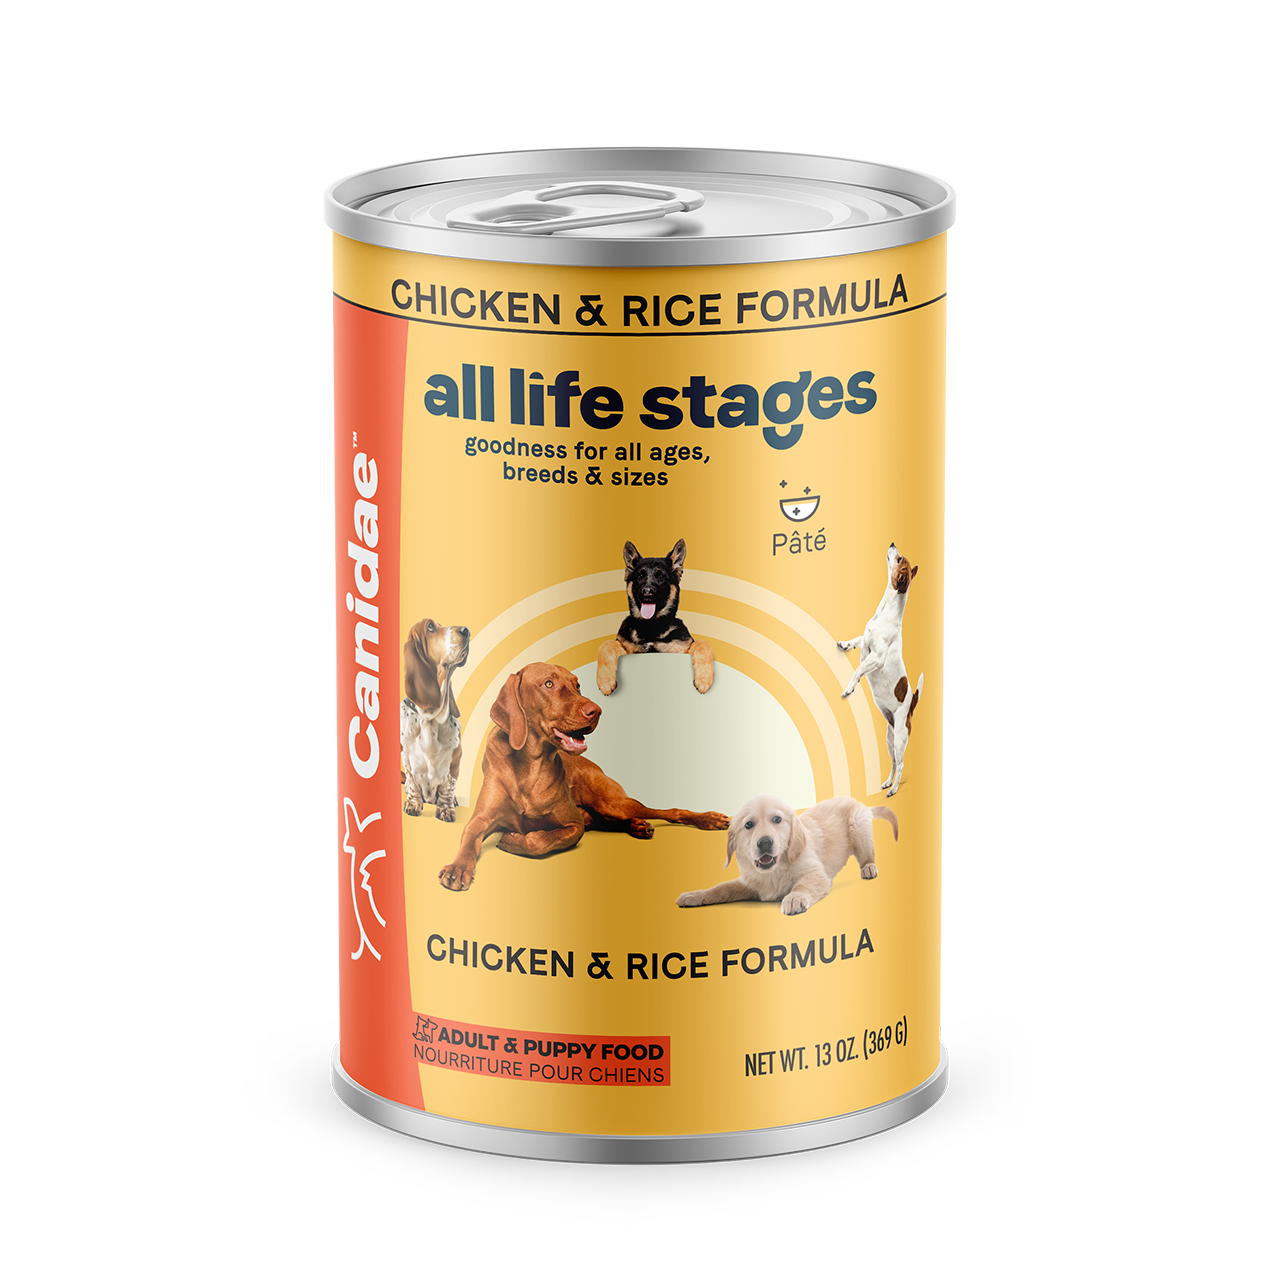 Canidae All Life Stages Chicken and Rice Canned Dog Food